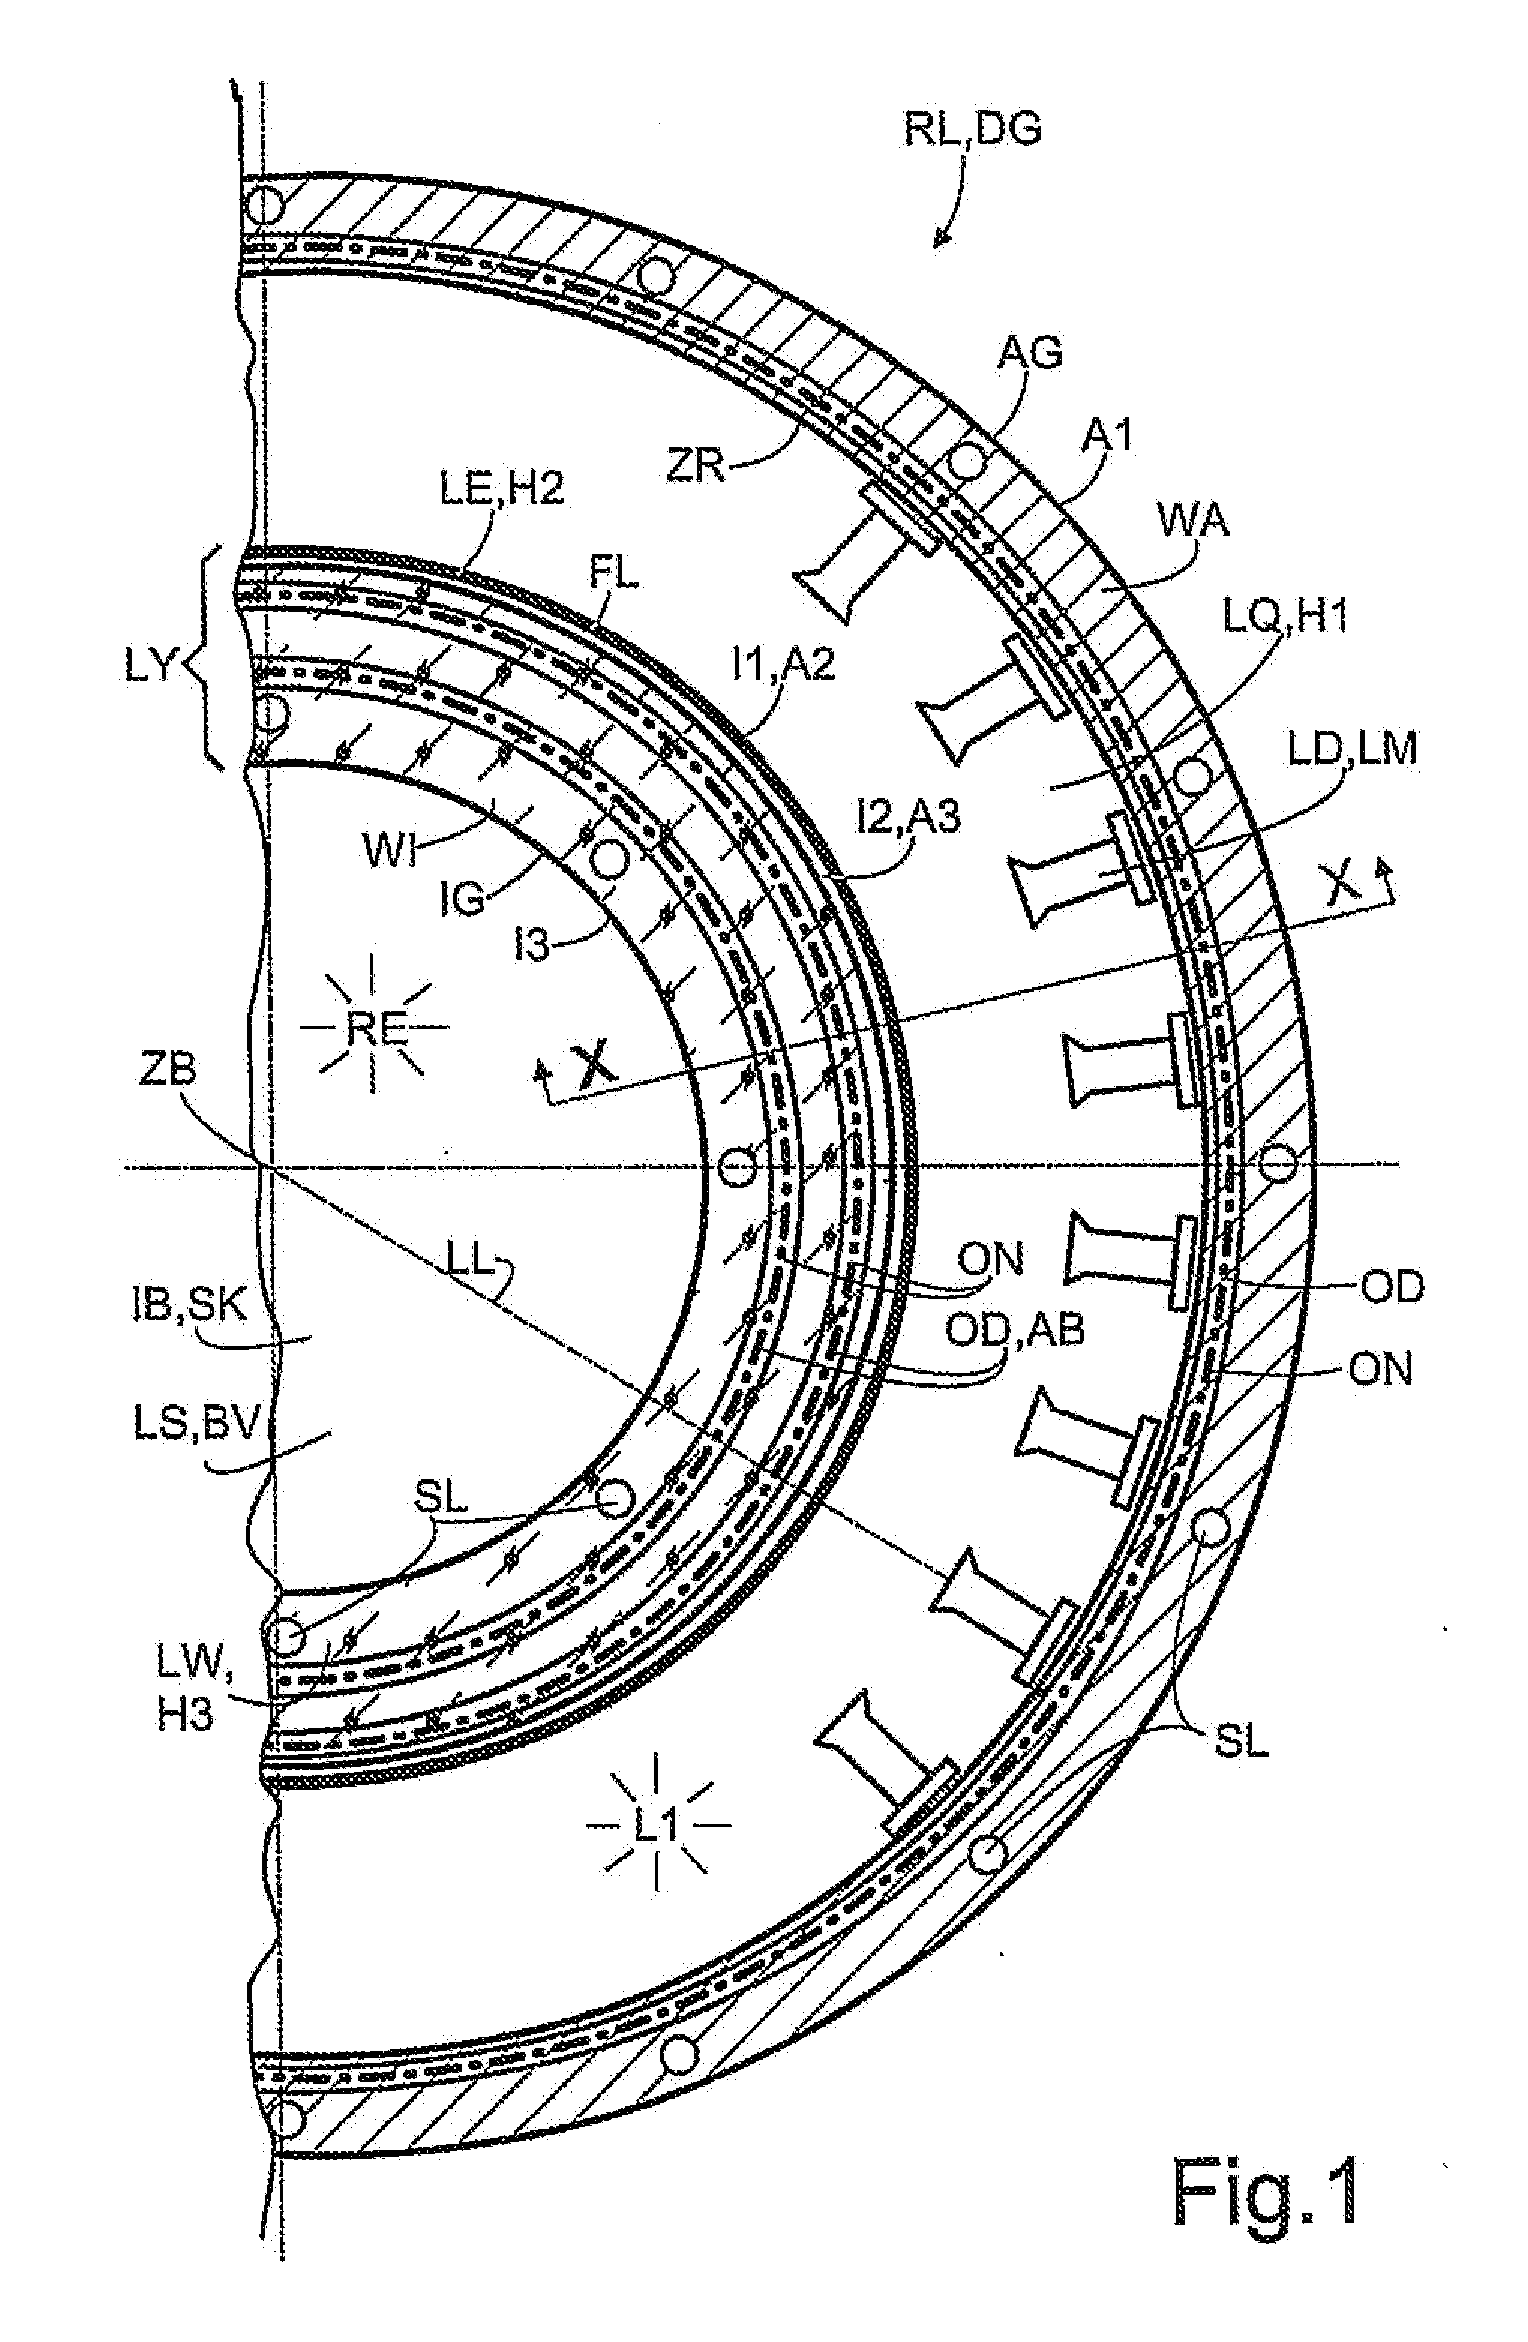 Ring lamp for illuminating a delimited volume and the use thereof